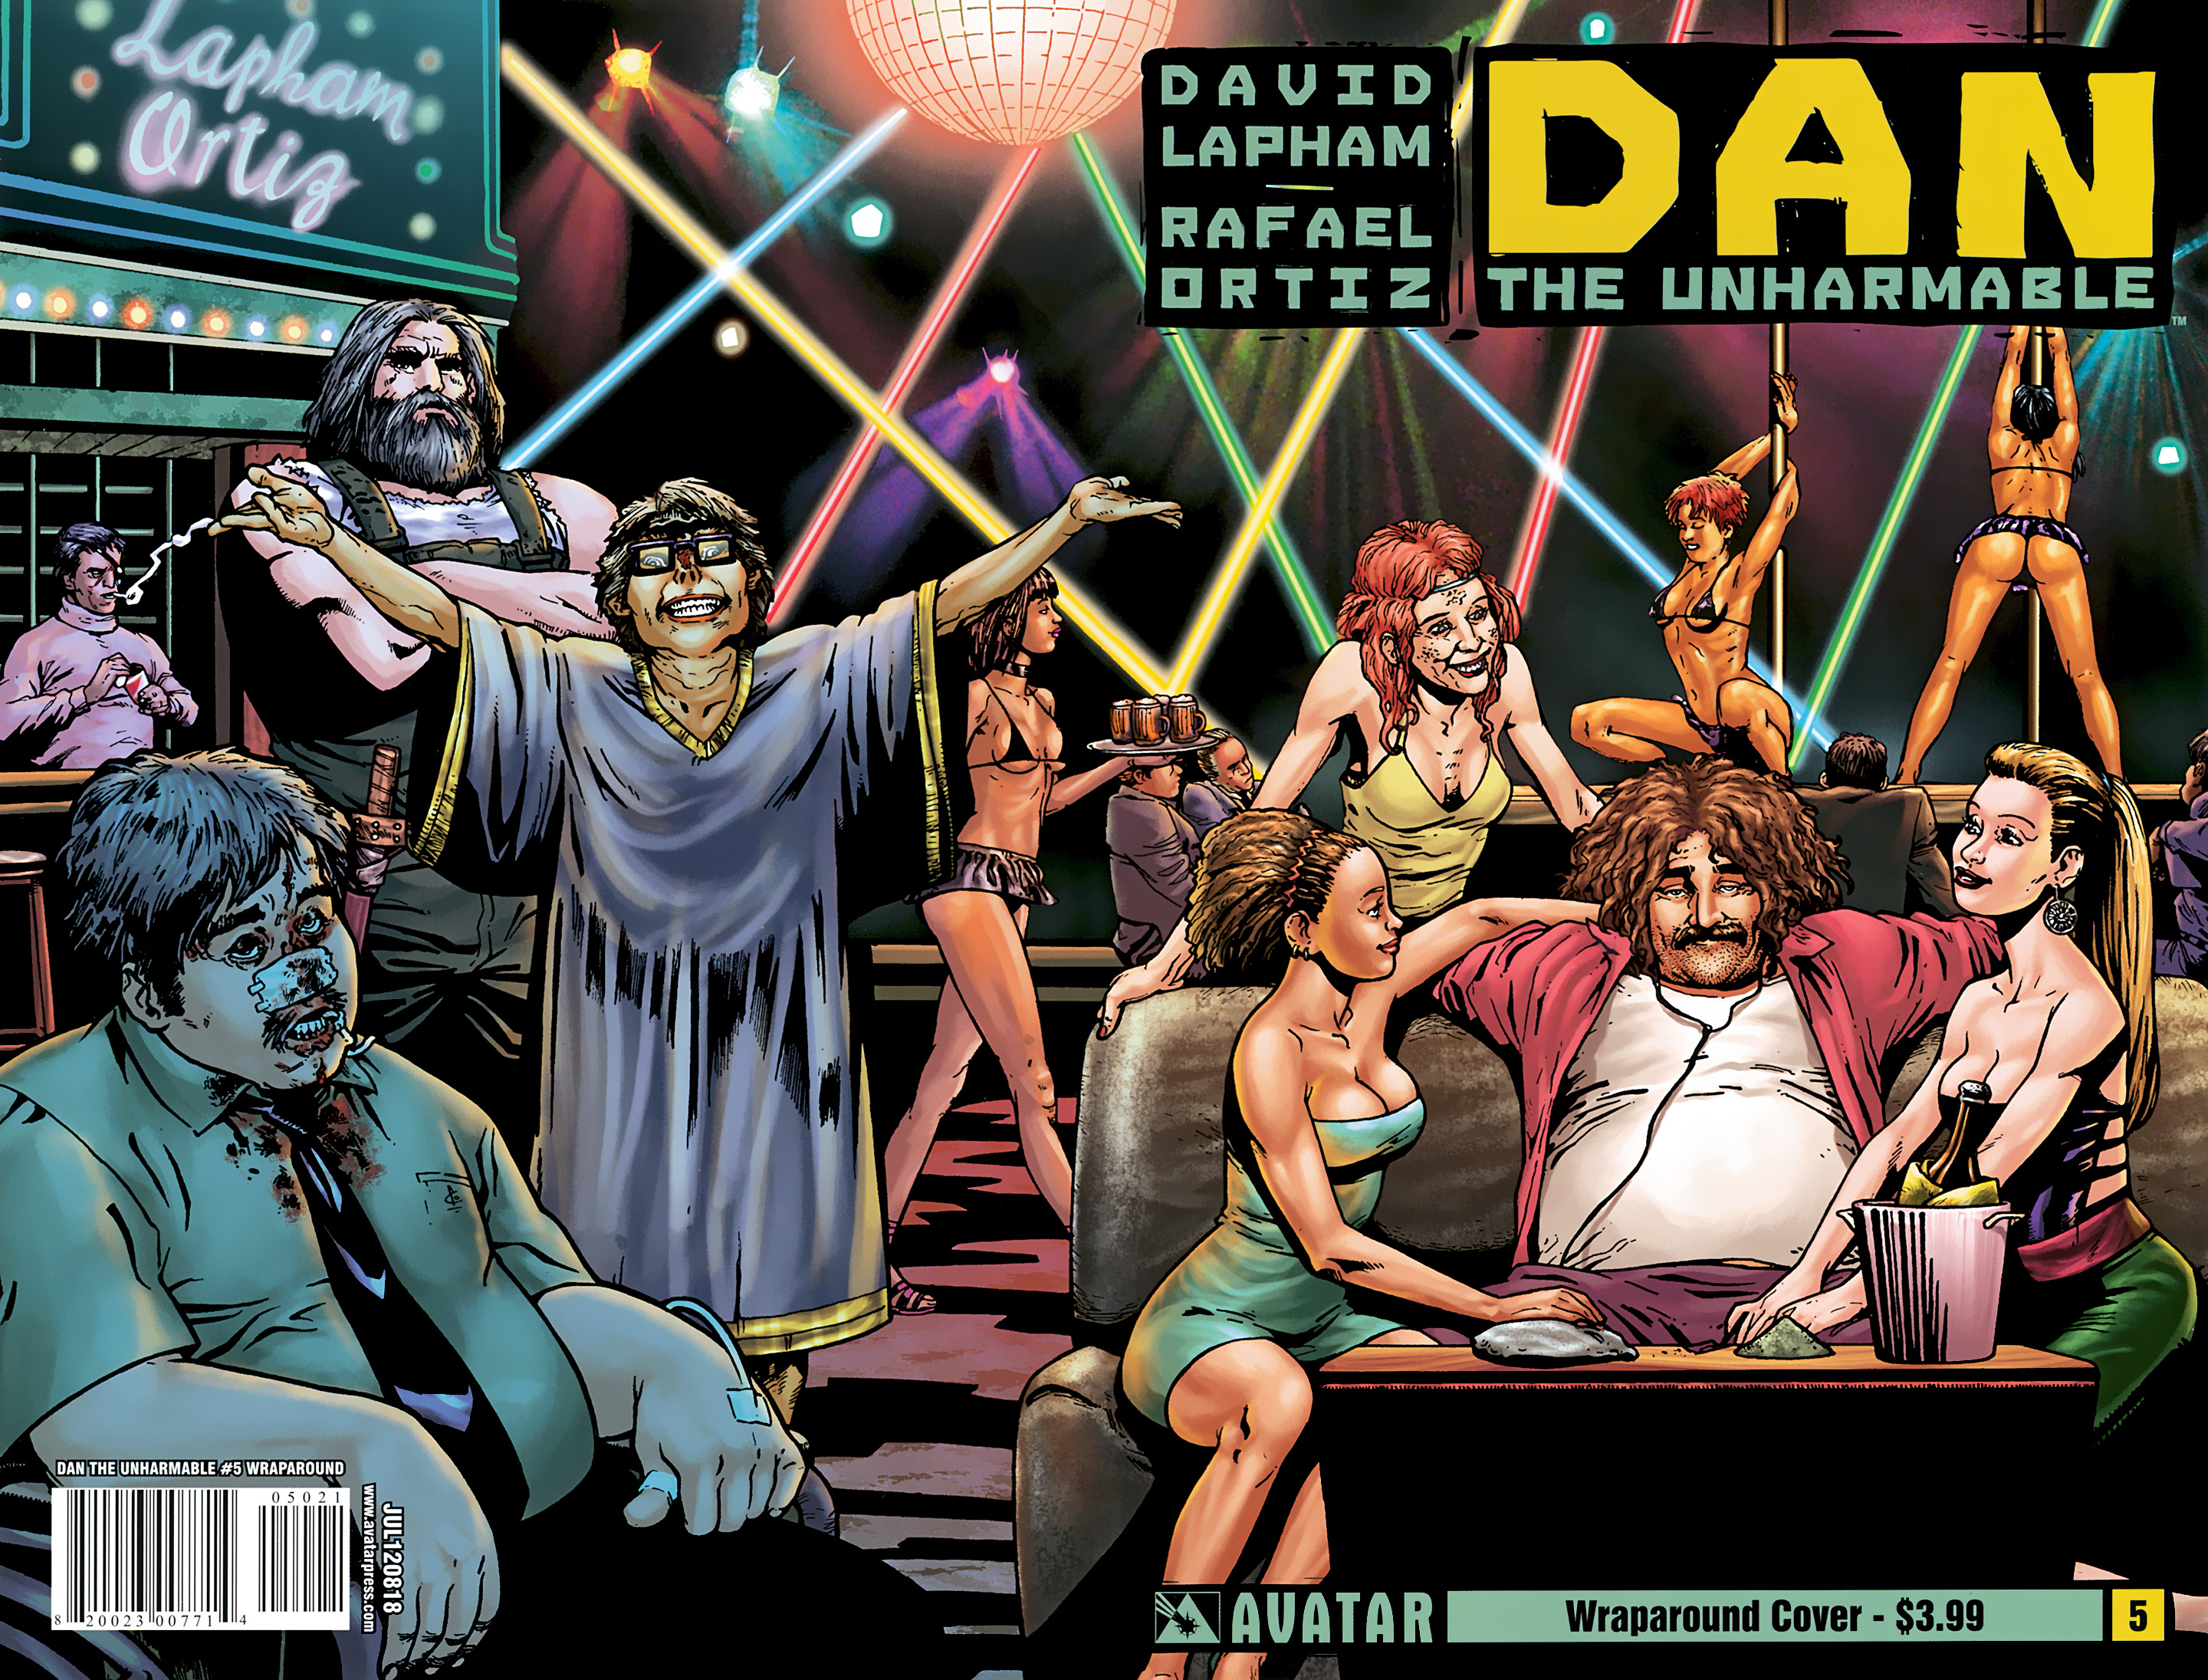 Read online Dan The Unharmable comic -  Issue #5 - 1